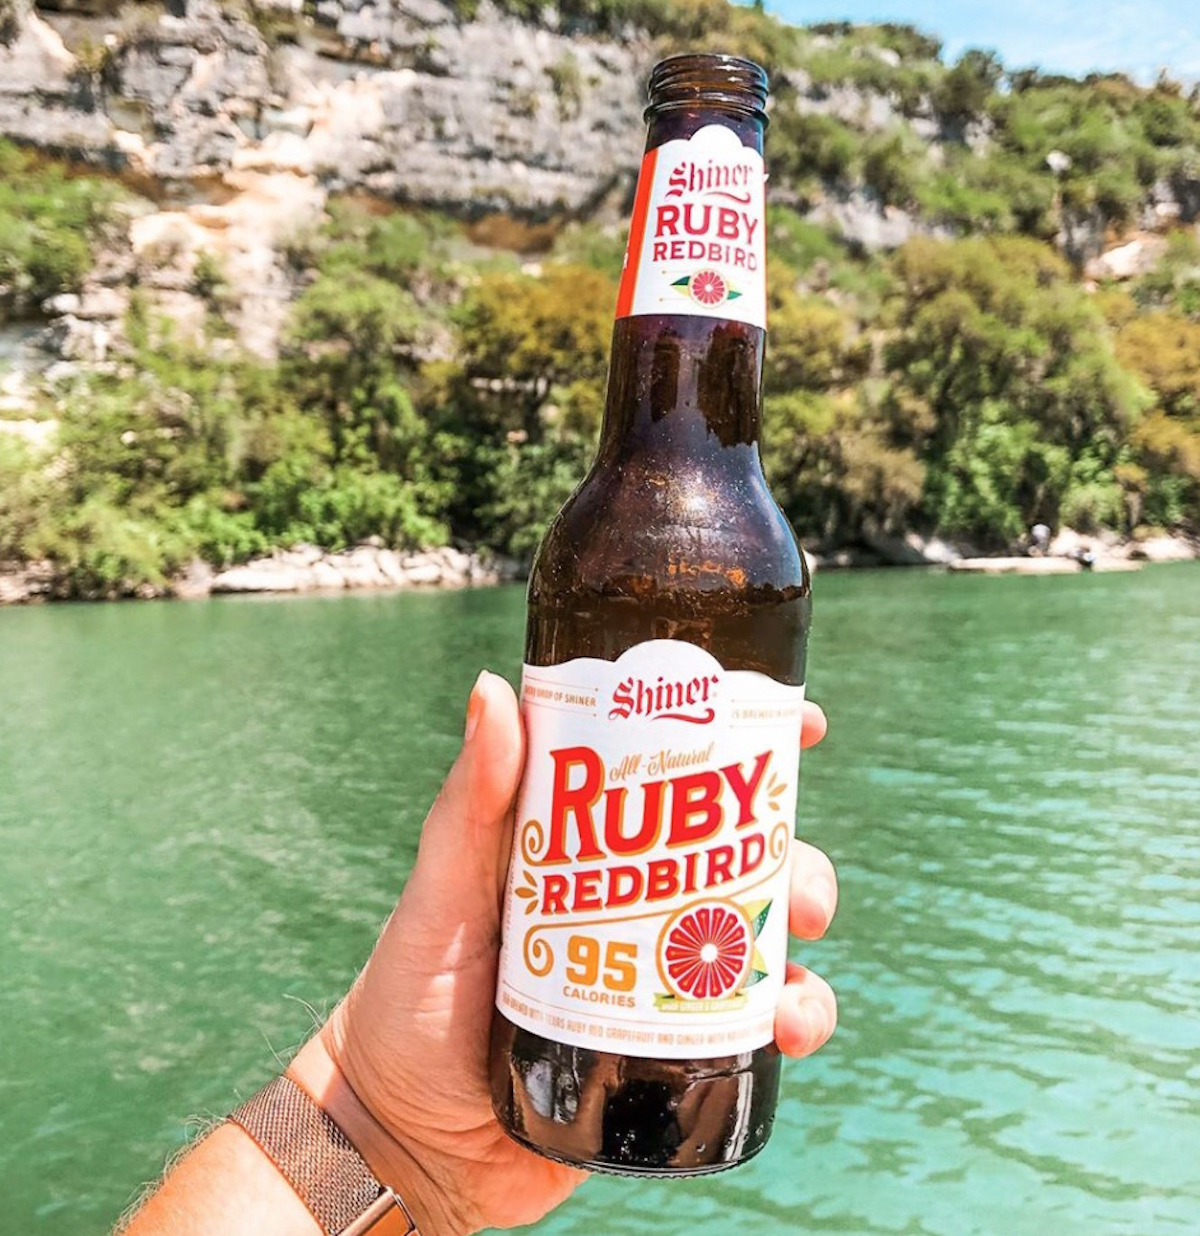 hand holding a glass bottle of shiner ruby redbird low carb alcoholic beverage in front of blue lake